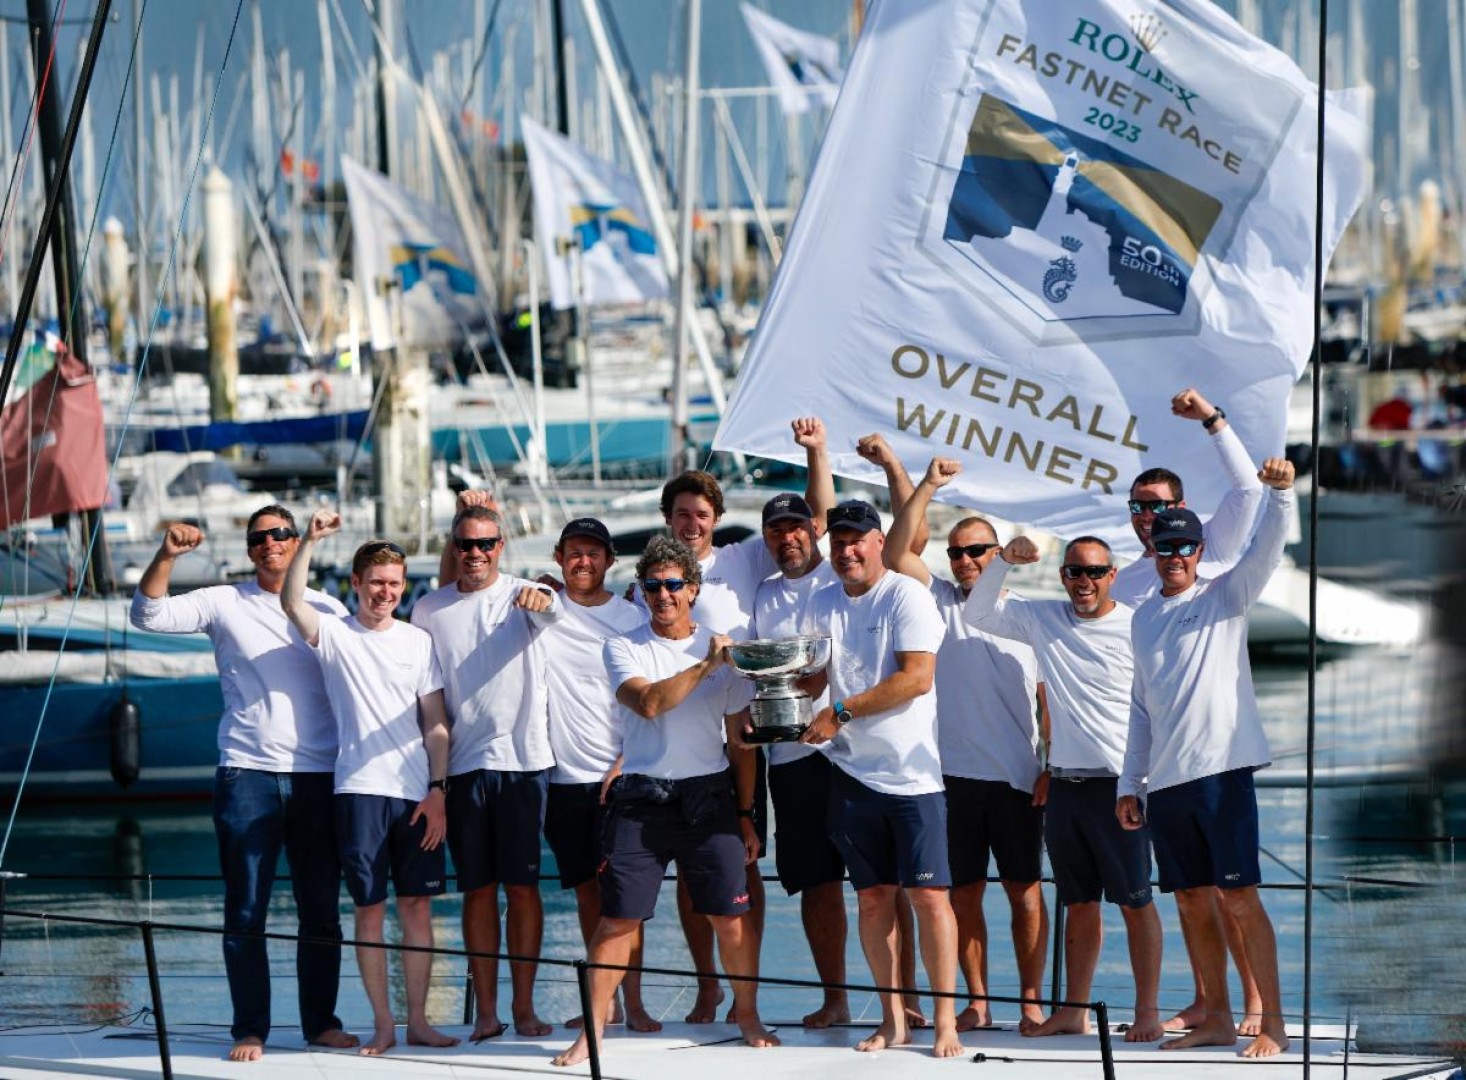 Max Klink (right) and tactician Adrian Stead (left) plus the Caro crew with the Rolex Fastnet Race overall winner's trophy - the Fastnet Challenge Cup ﻿© Paul Wyeth